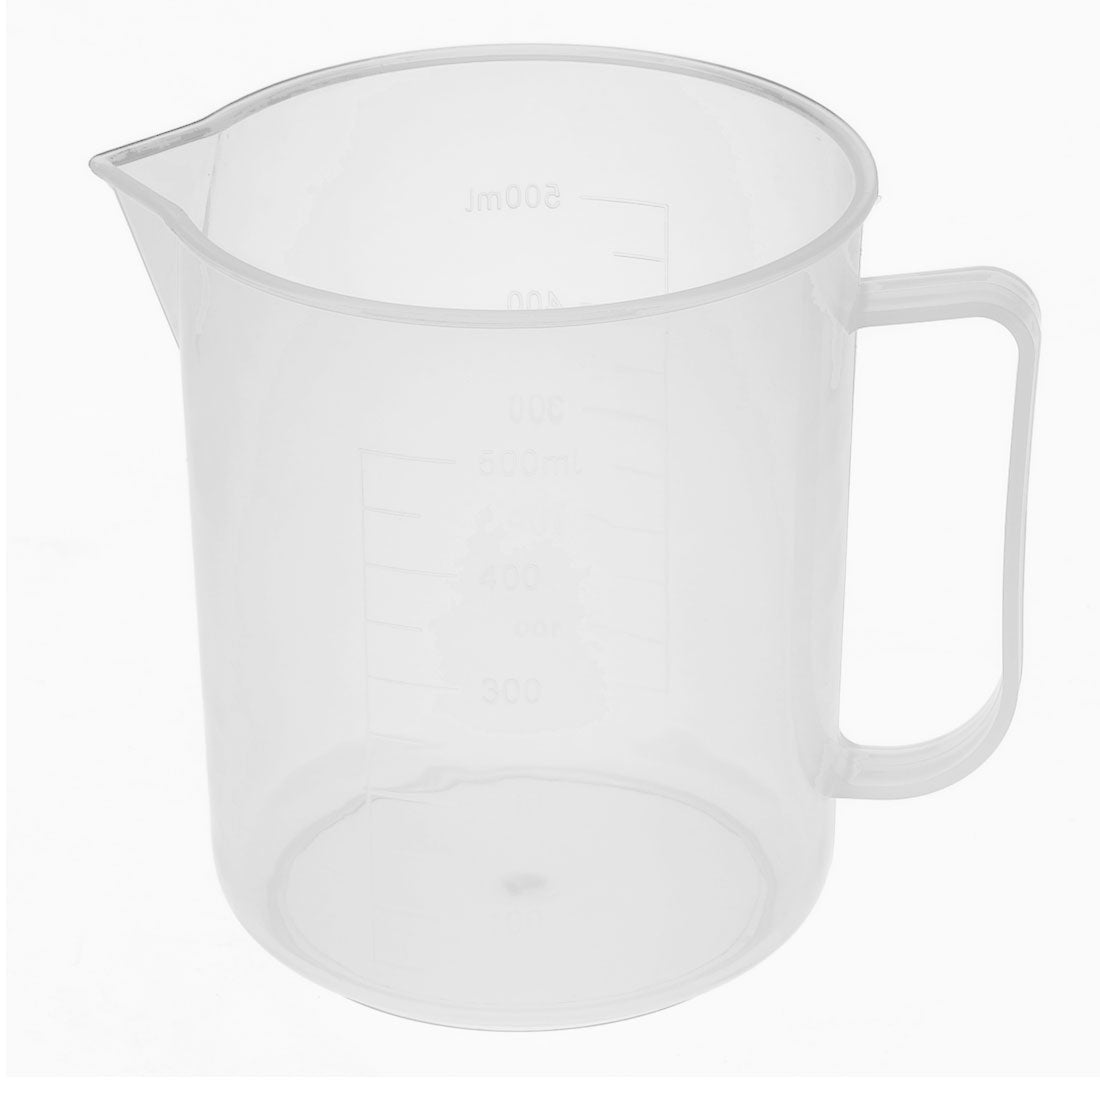 uxcell Uxcell Kitchen Laboratory Environmentally Plastic Measuring Cup Clear 500ml Capacity